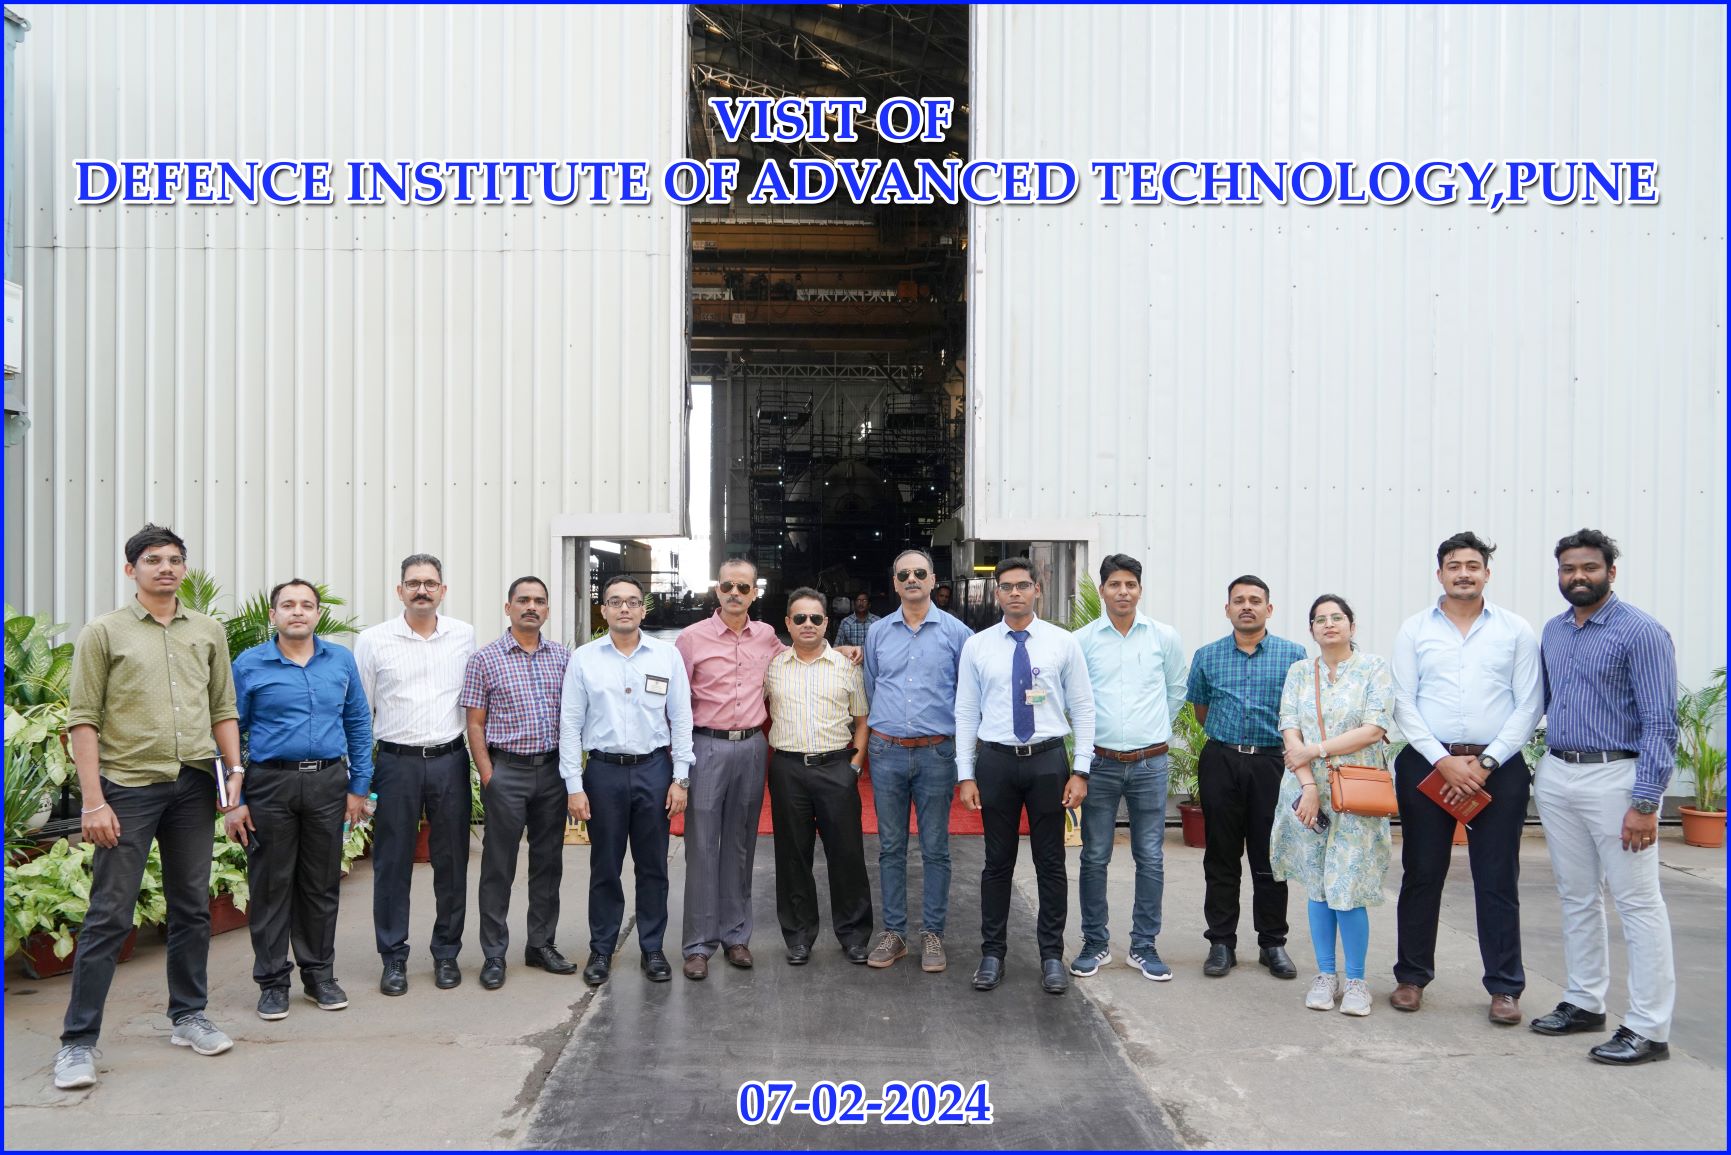 VISIT OF DEFENCE INSTITUTE OF ADVANCED TECHNOLOGY, PUNE - 07.02.2024